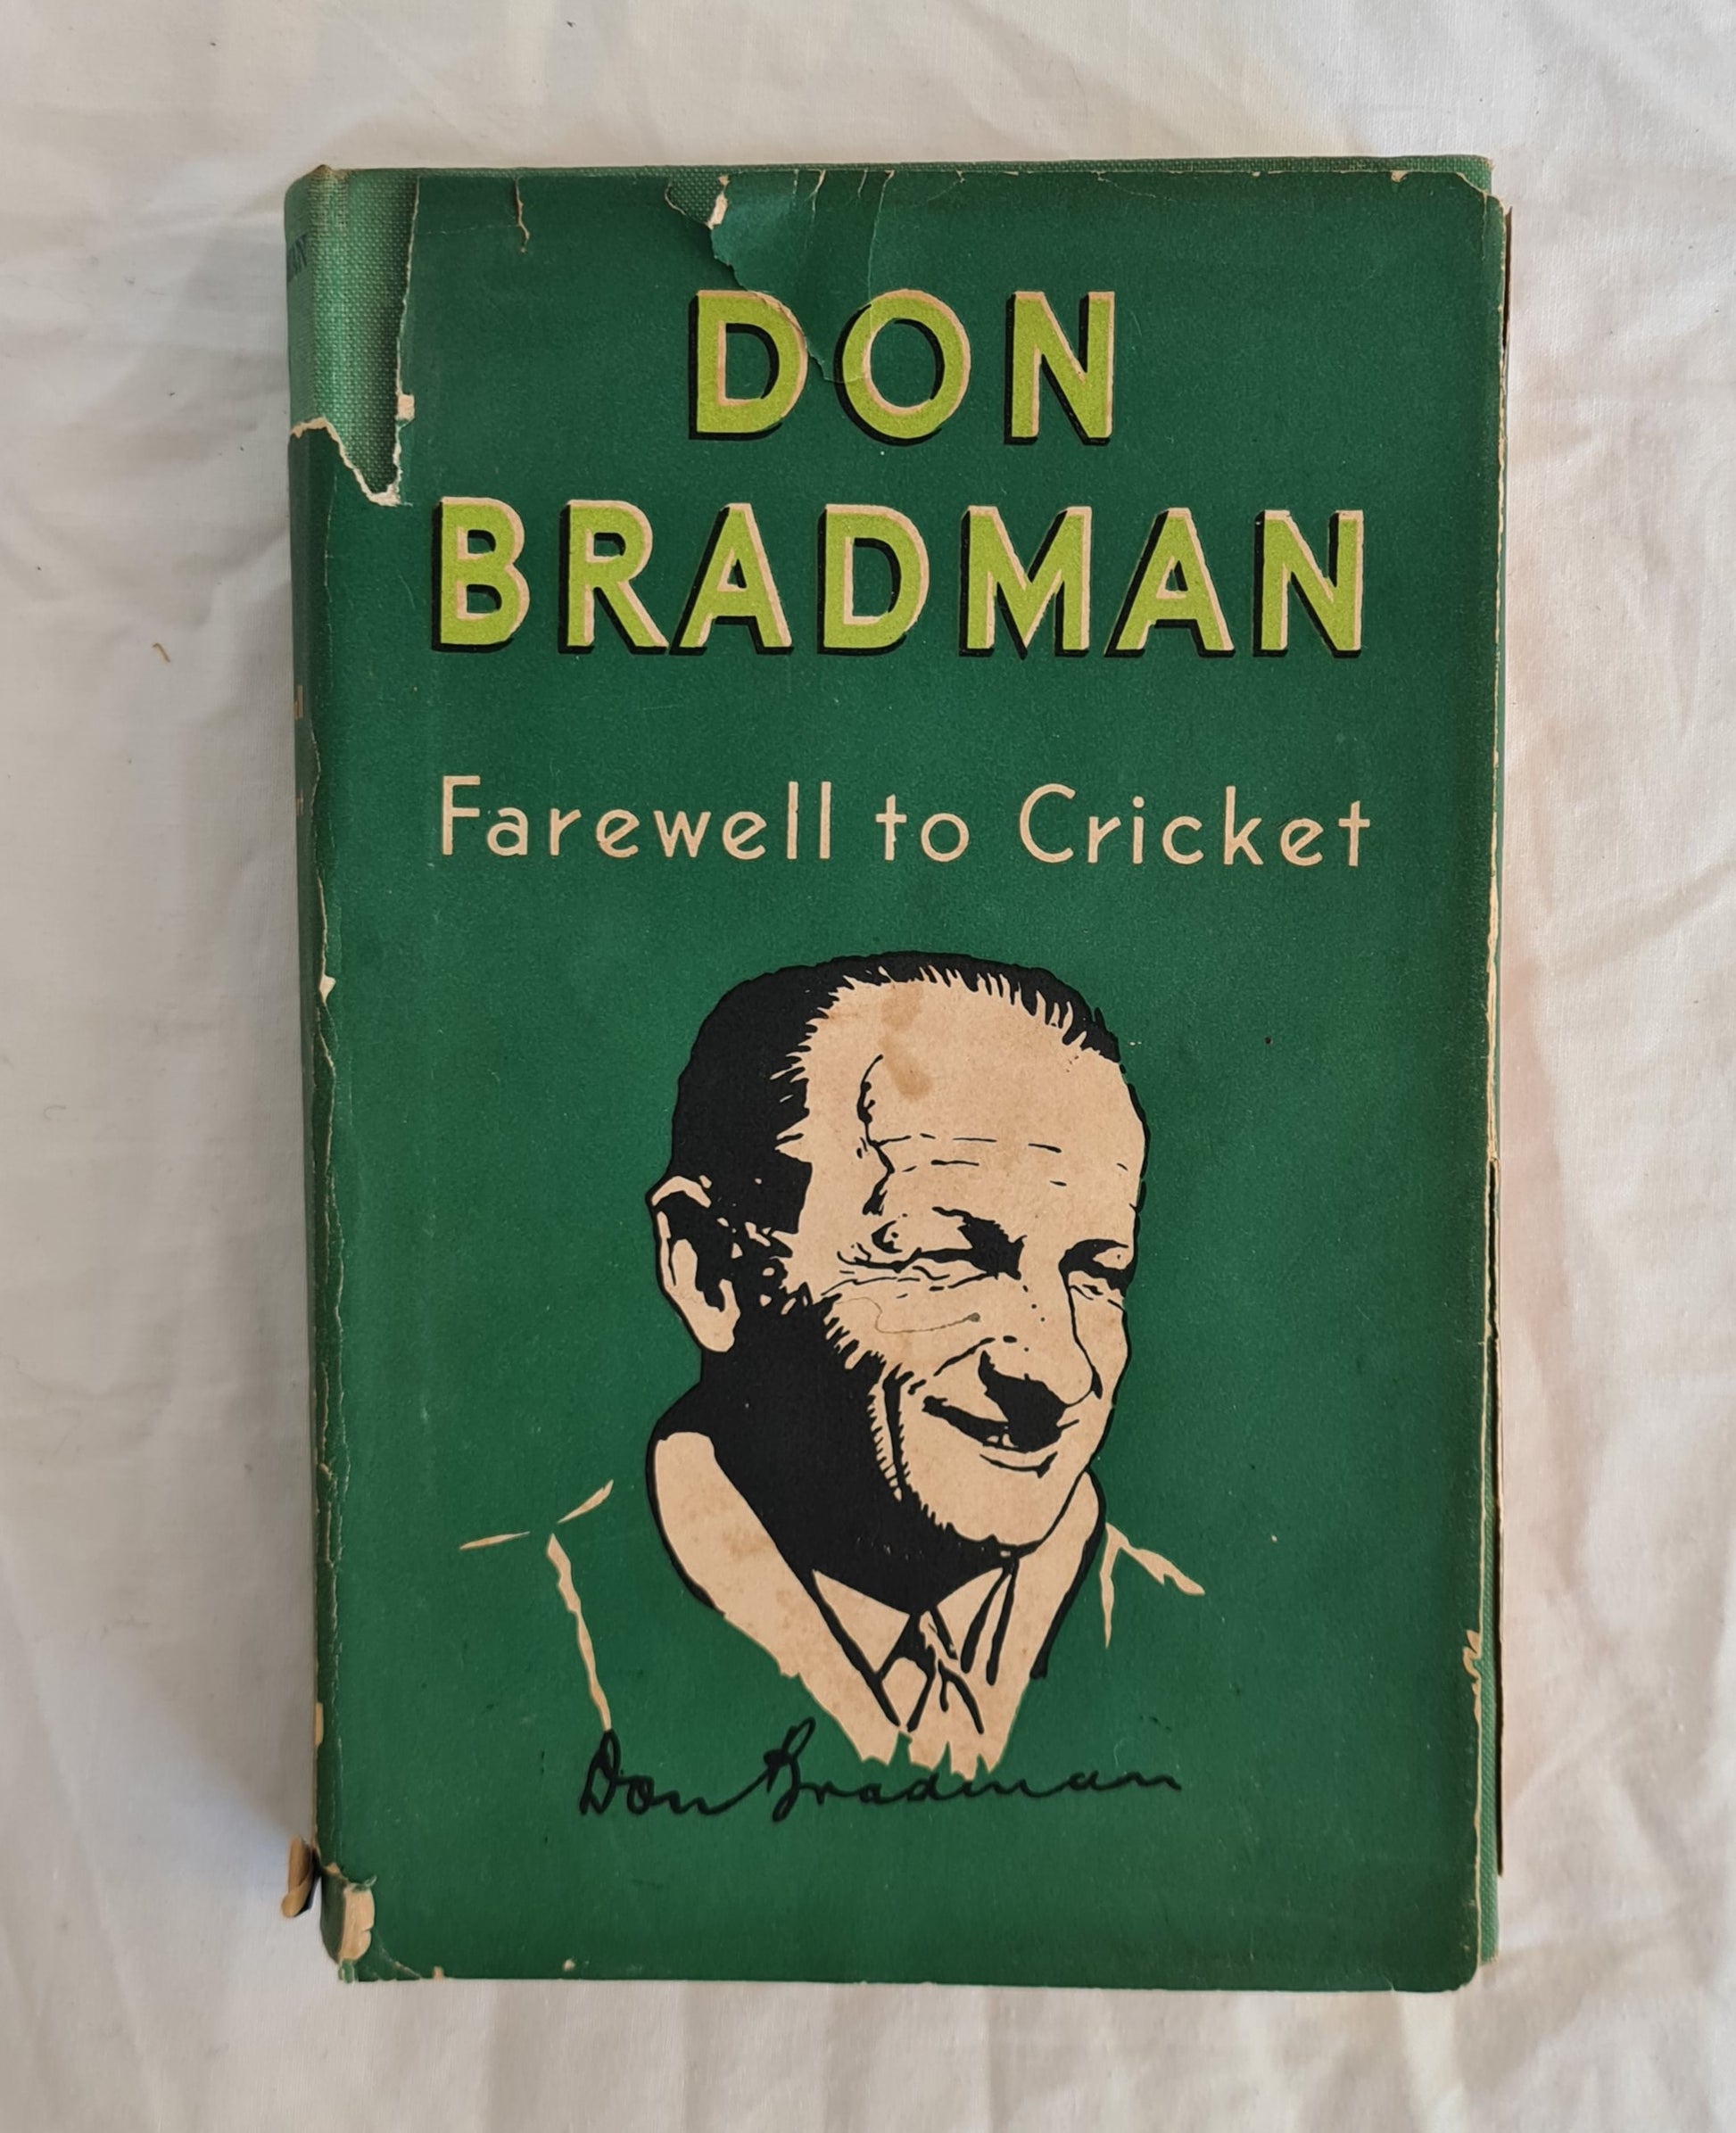 Farewell to Cricket by Don Bradman